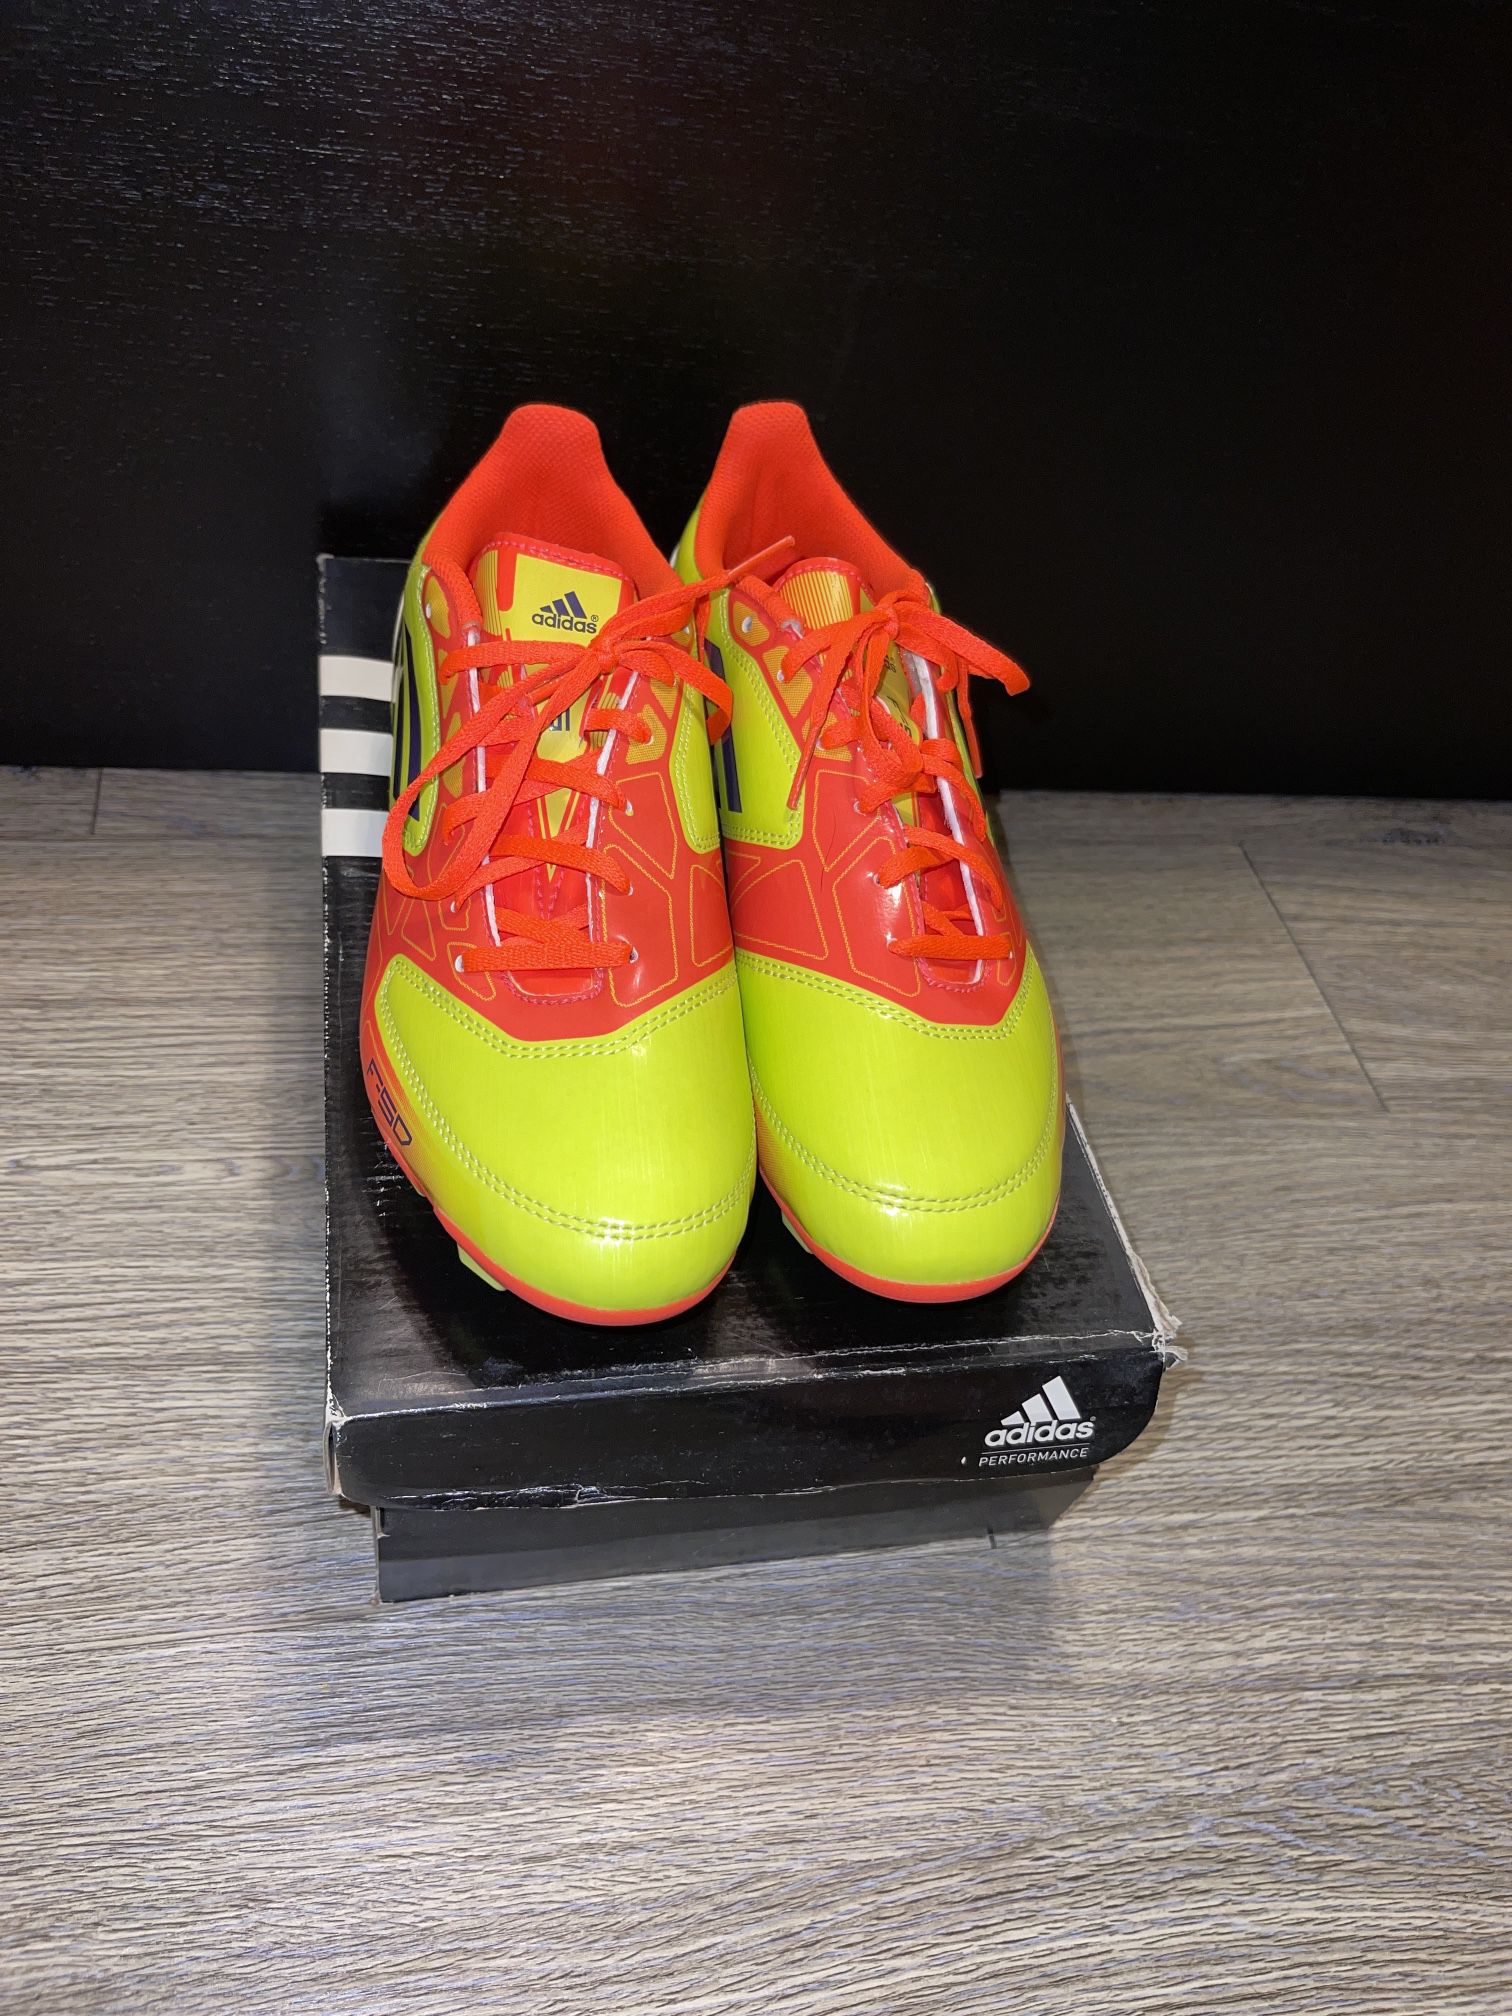 Adidas TRX FG Cleats for Sale in Antonio, TX - OfferUp